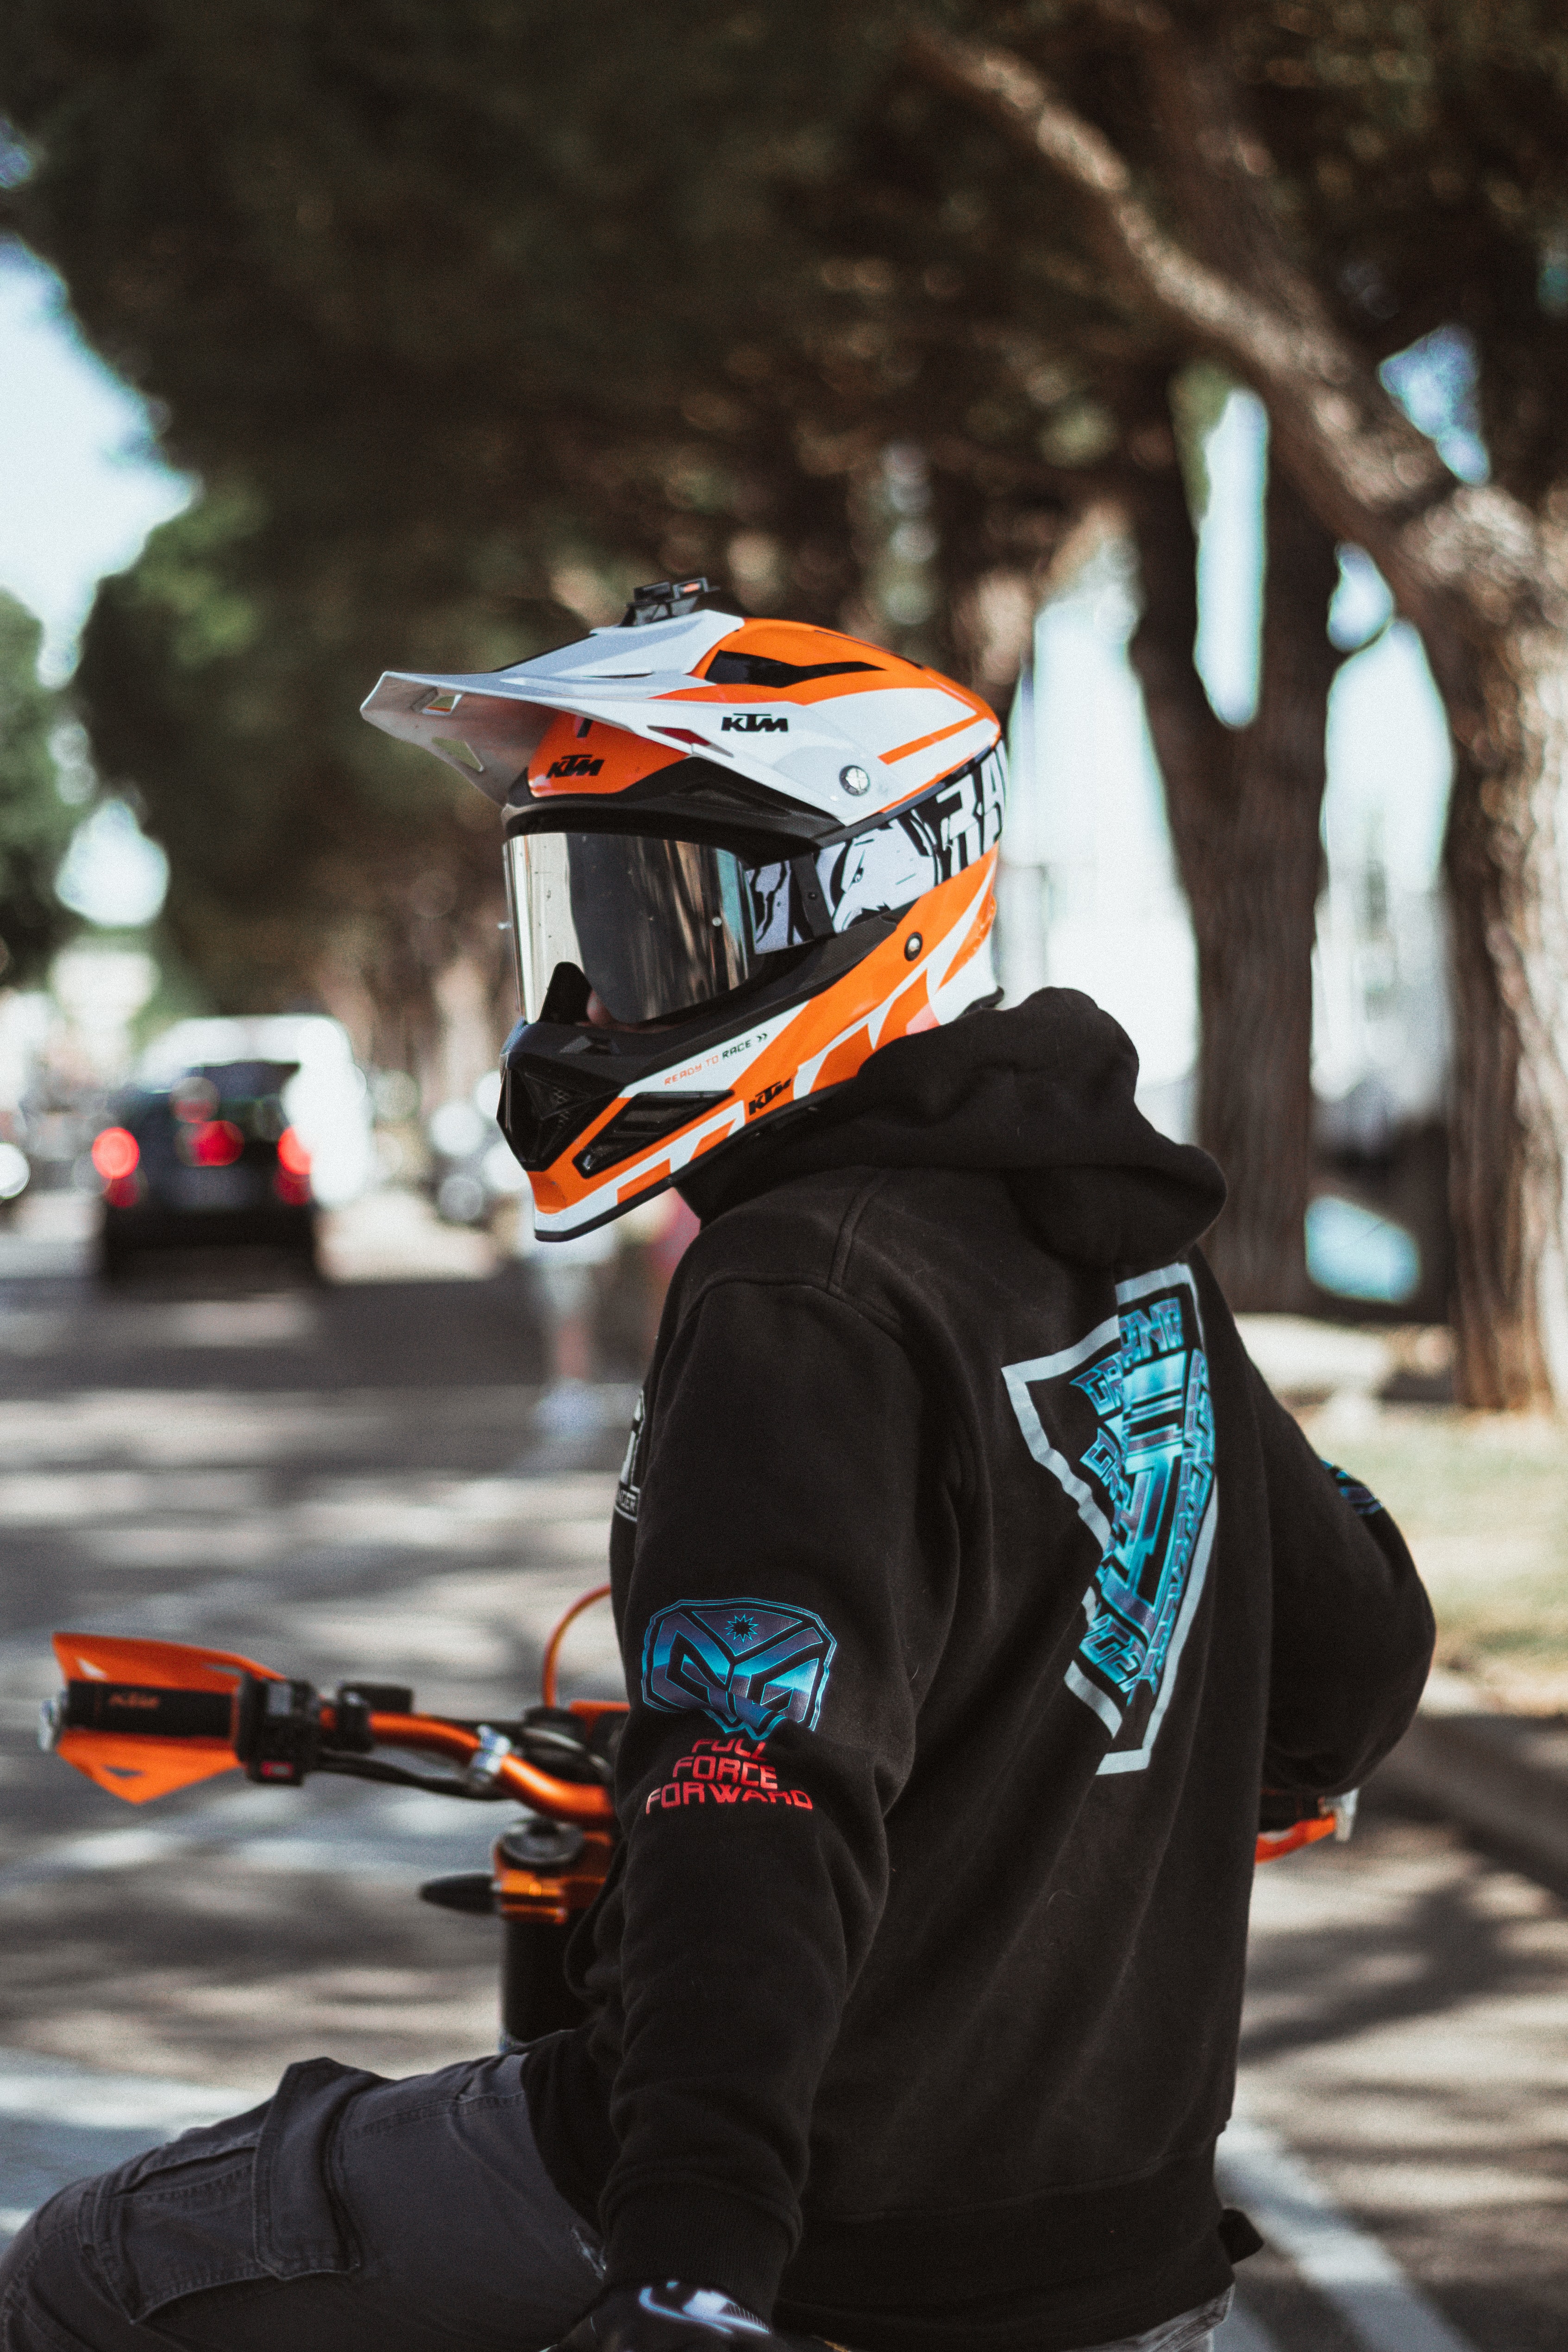 outfit, minimalism, hoodies, motorcyclist 3d Wallpaper